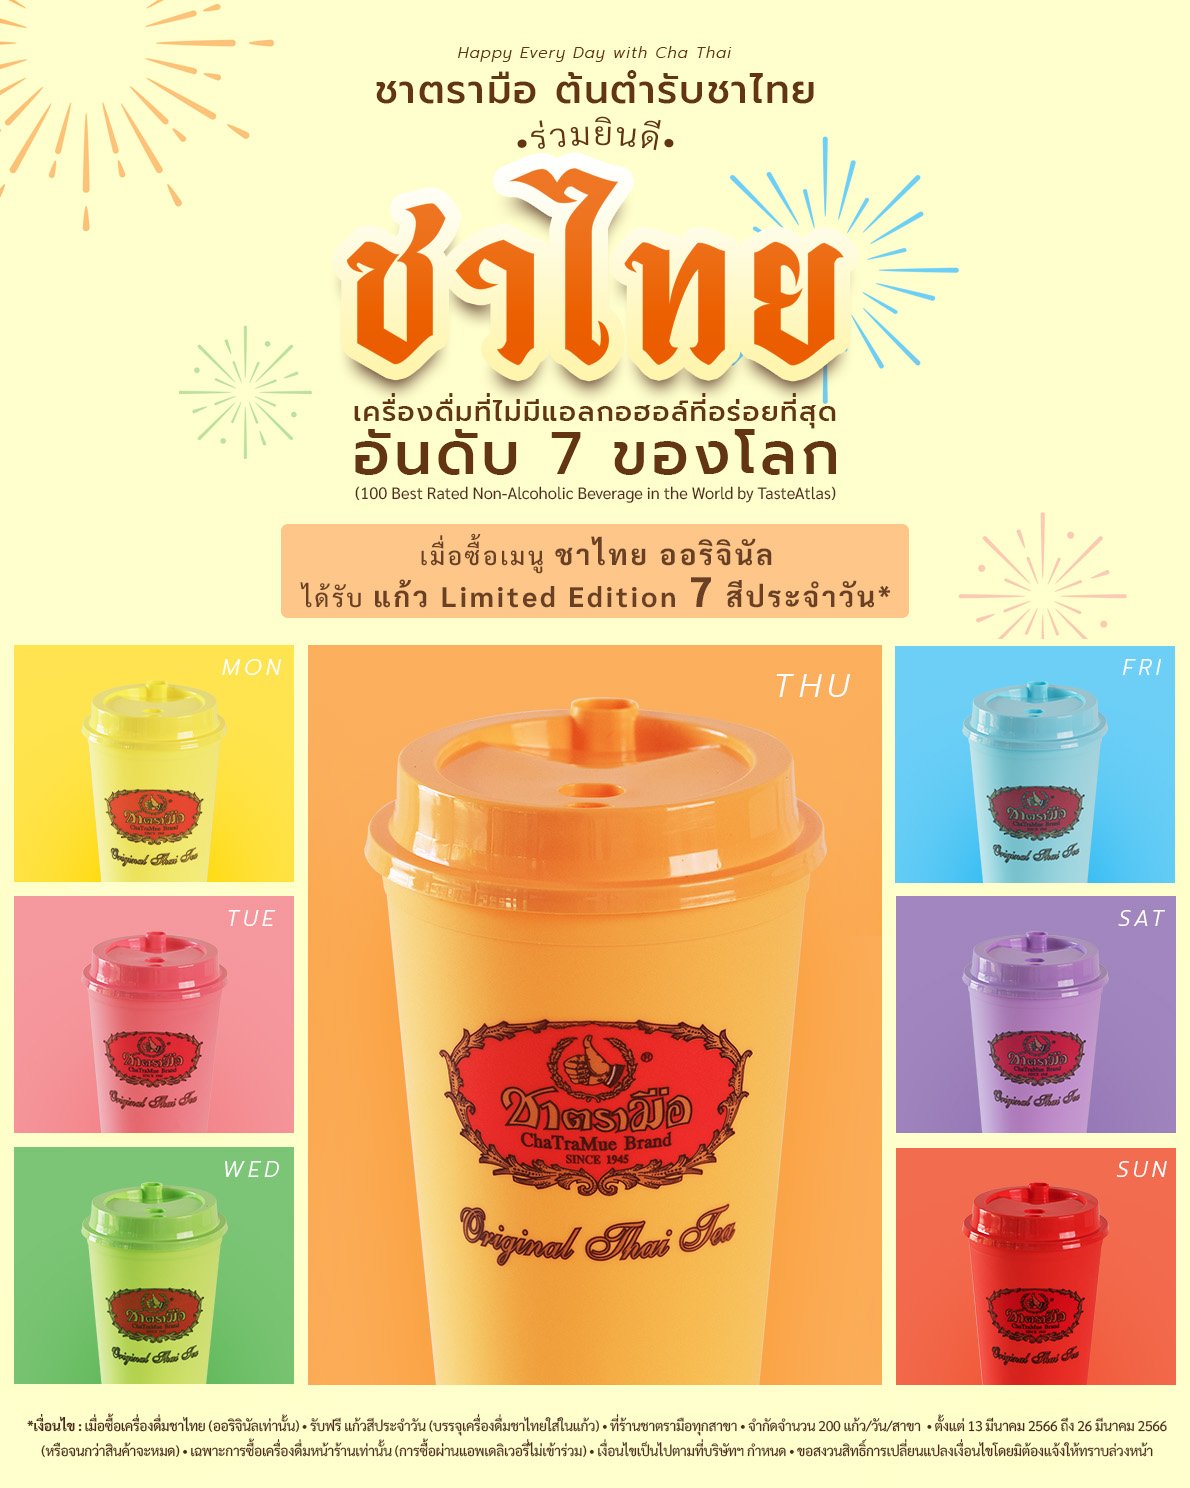 Milk Pudding Topping 5 Baht form normal price 10 Baht(copy)